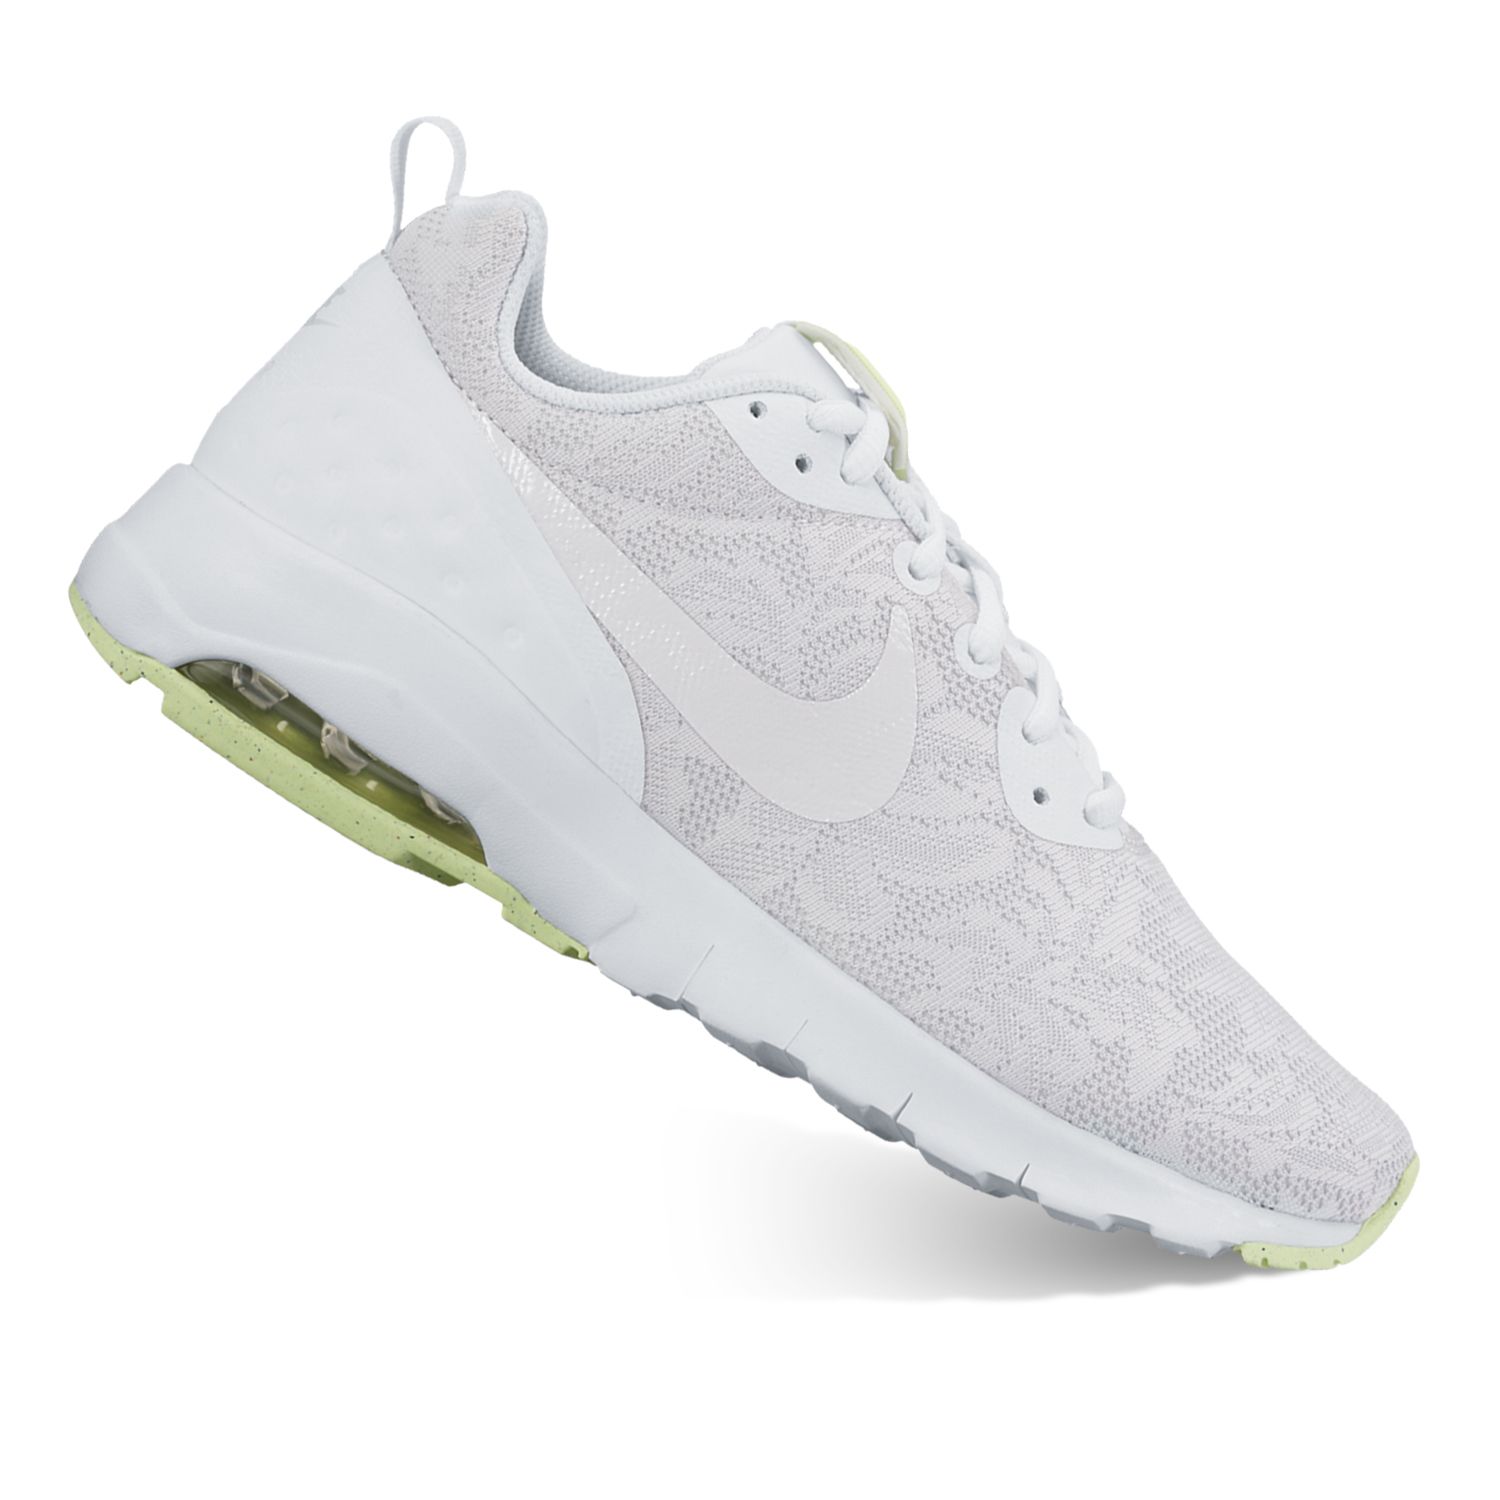 Nike Air Max Motion Low ENG Women's Shoes